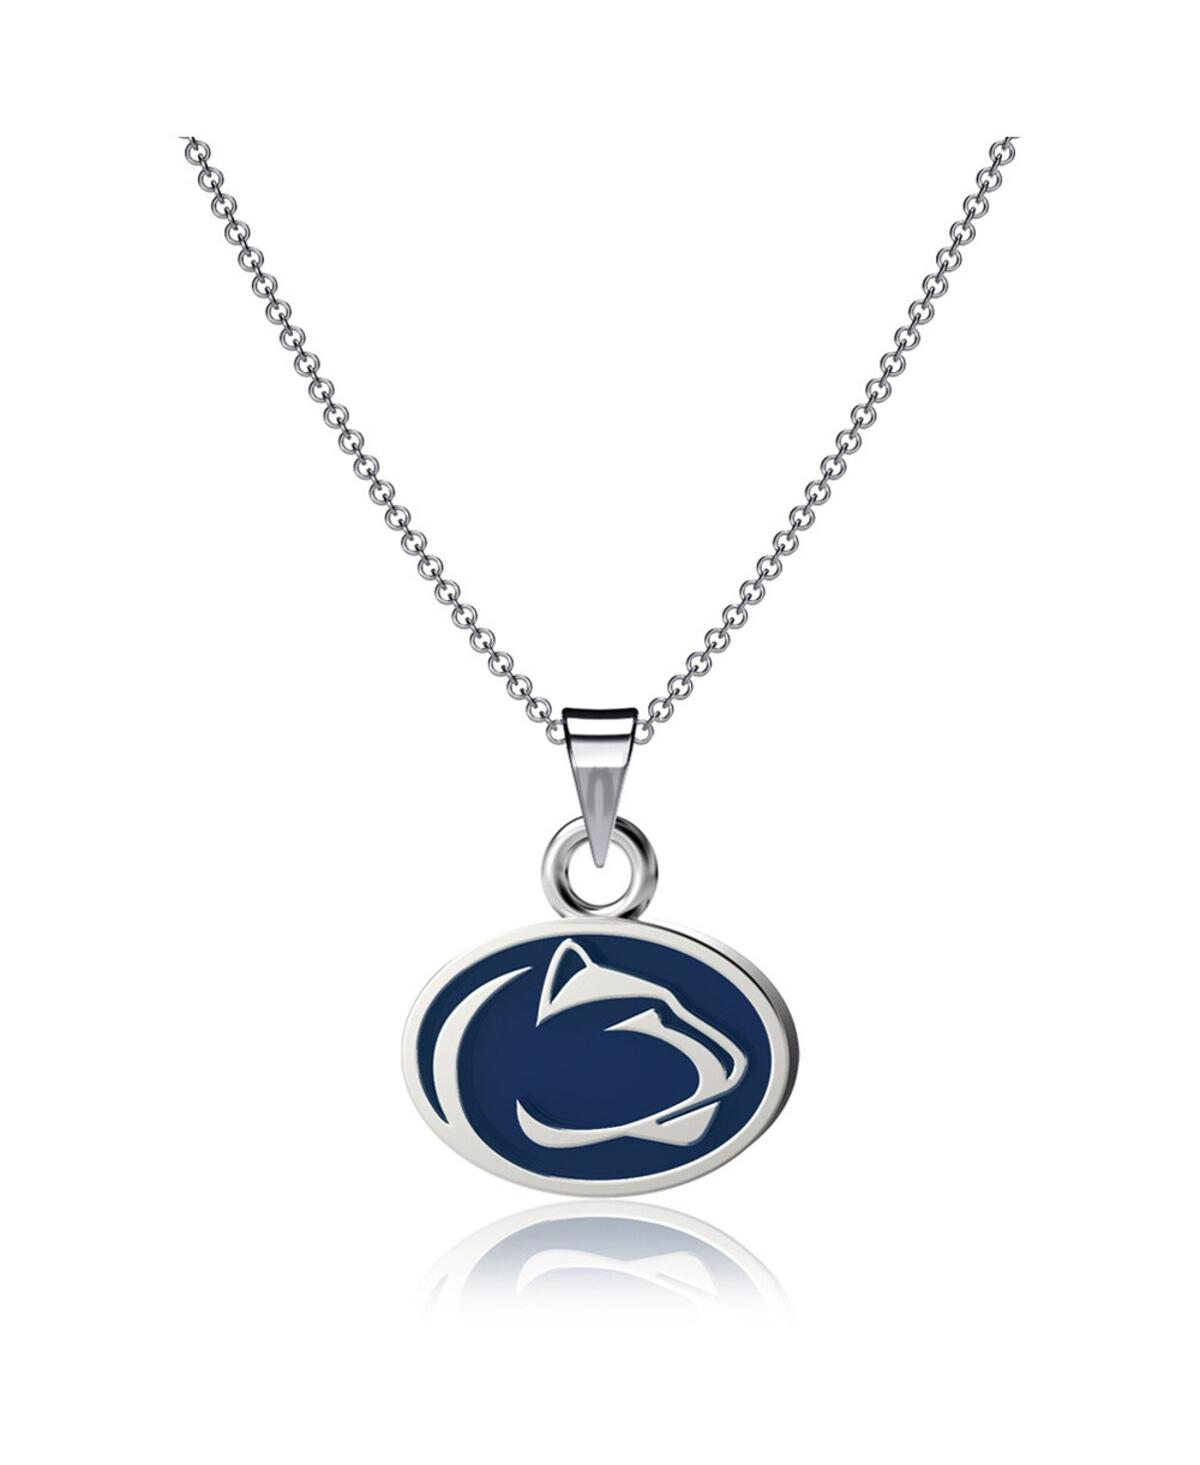 Shop Dayna Designs Women's  Penn State Nittany Lions Enamel Pendant Necklace In Navy,silver